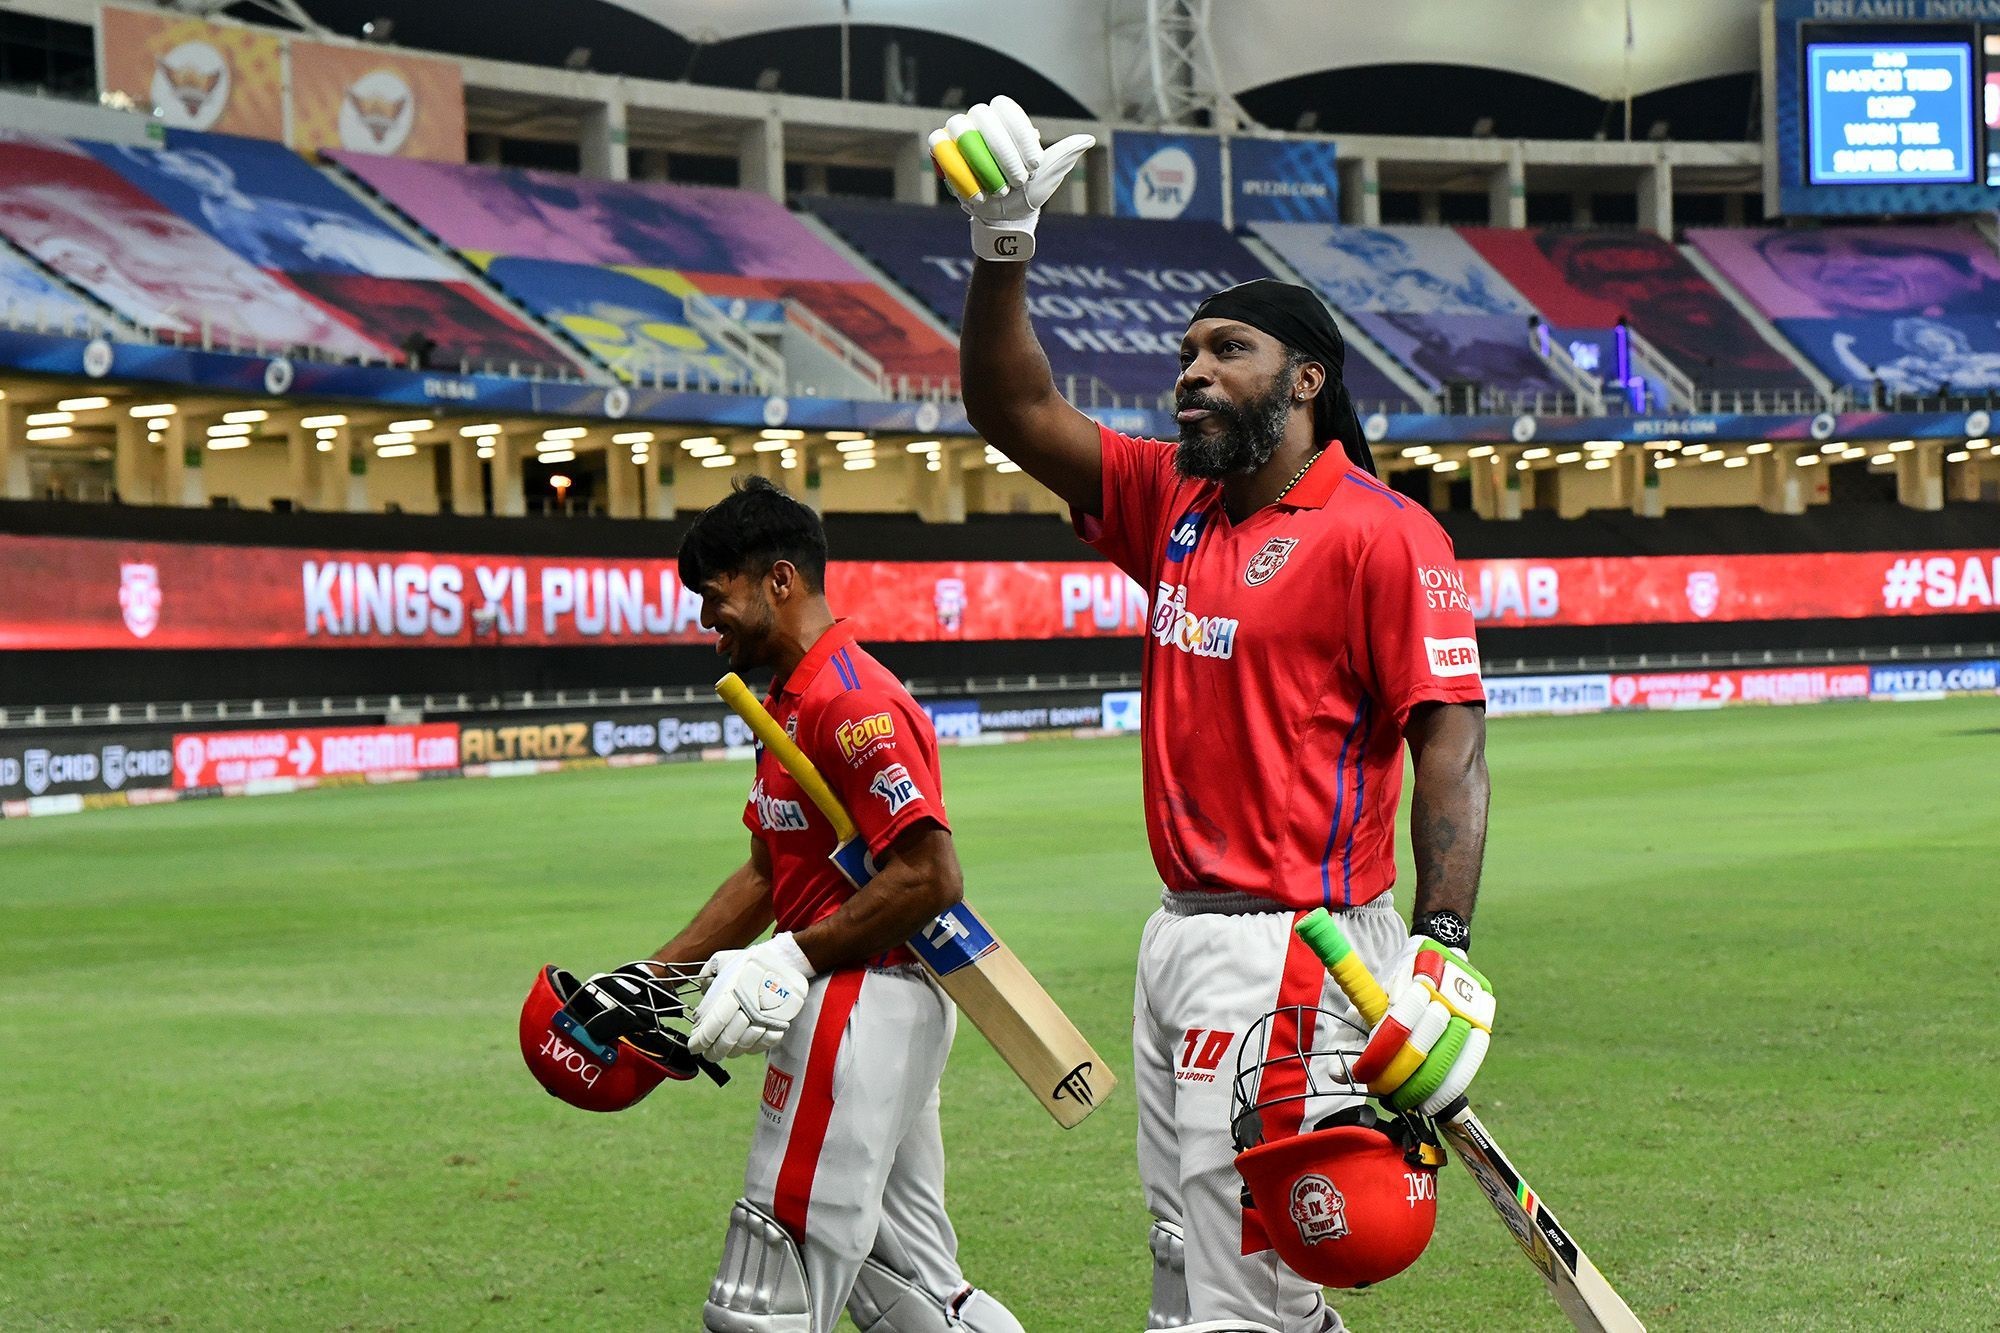 IPL MI vs KXIP Super-over - #UniverseBoss Trends on Twitter After Chris Gayle Becomes First Batsman to Hit a Six in Super-over This Year